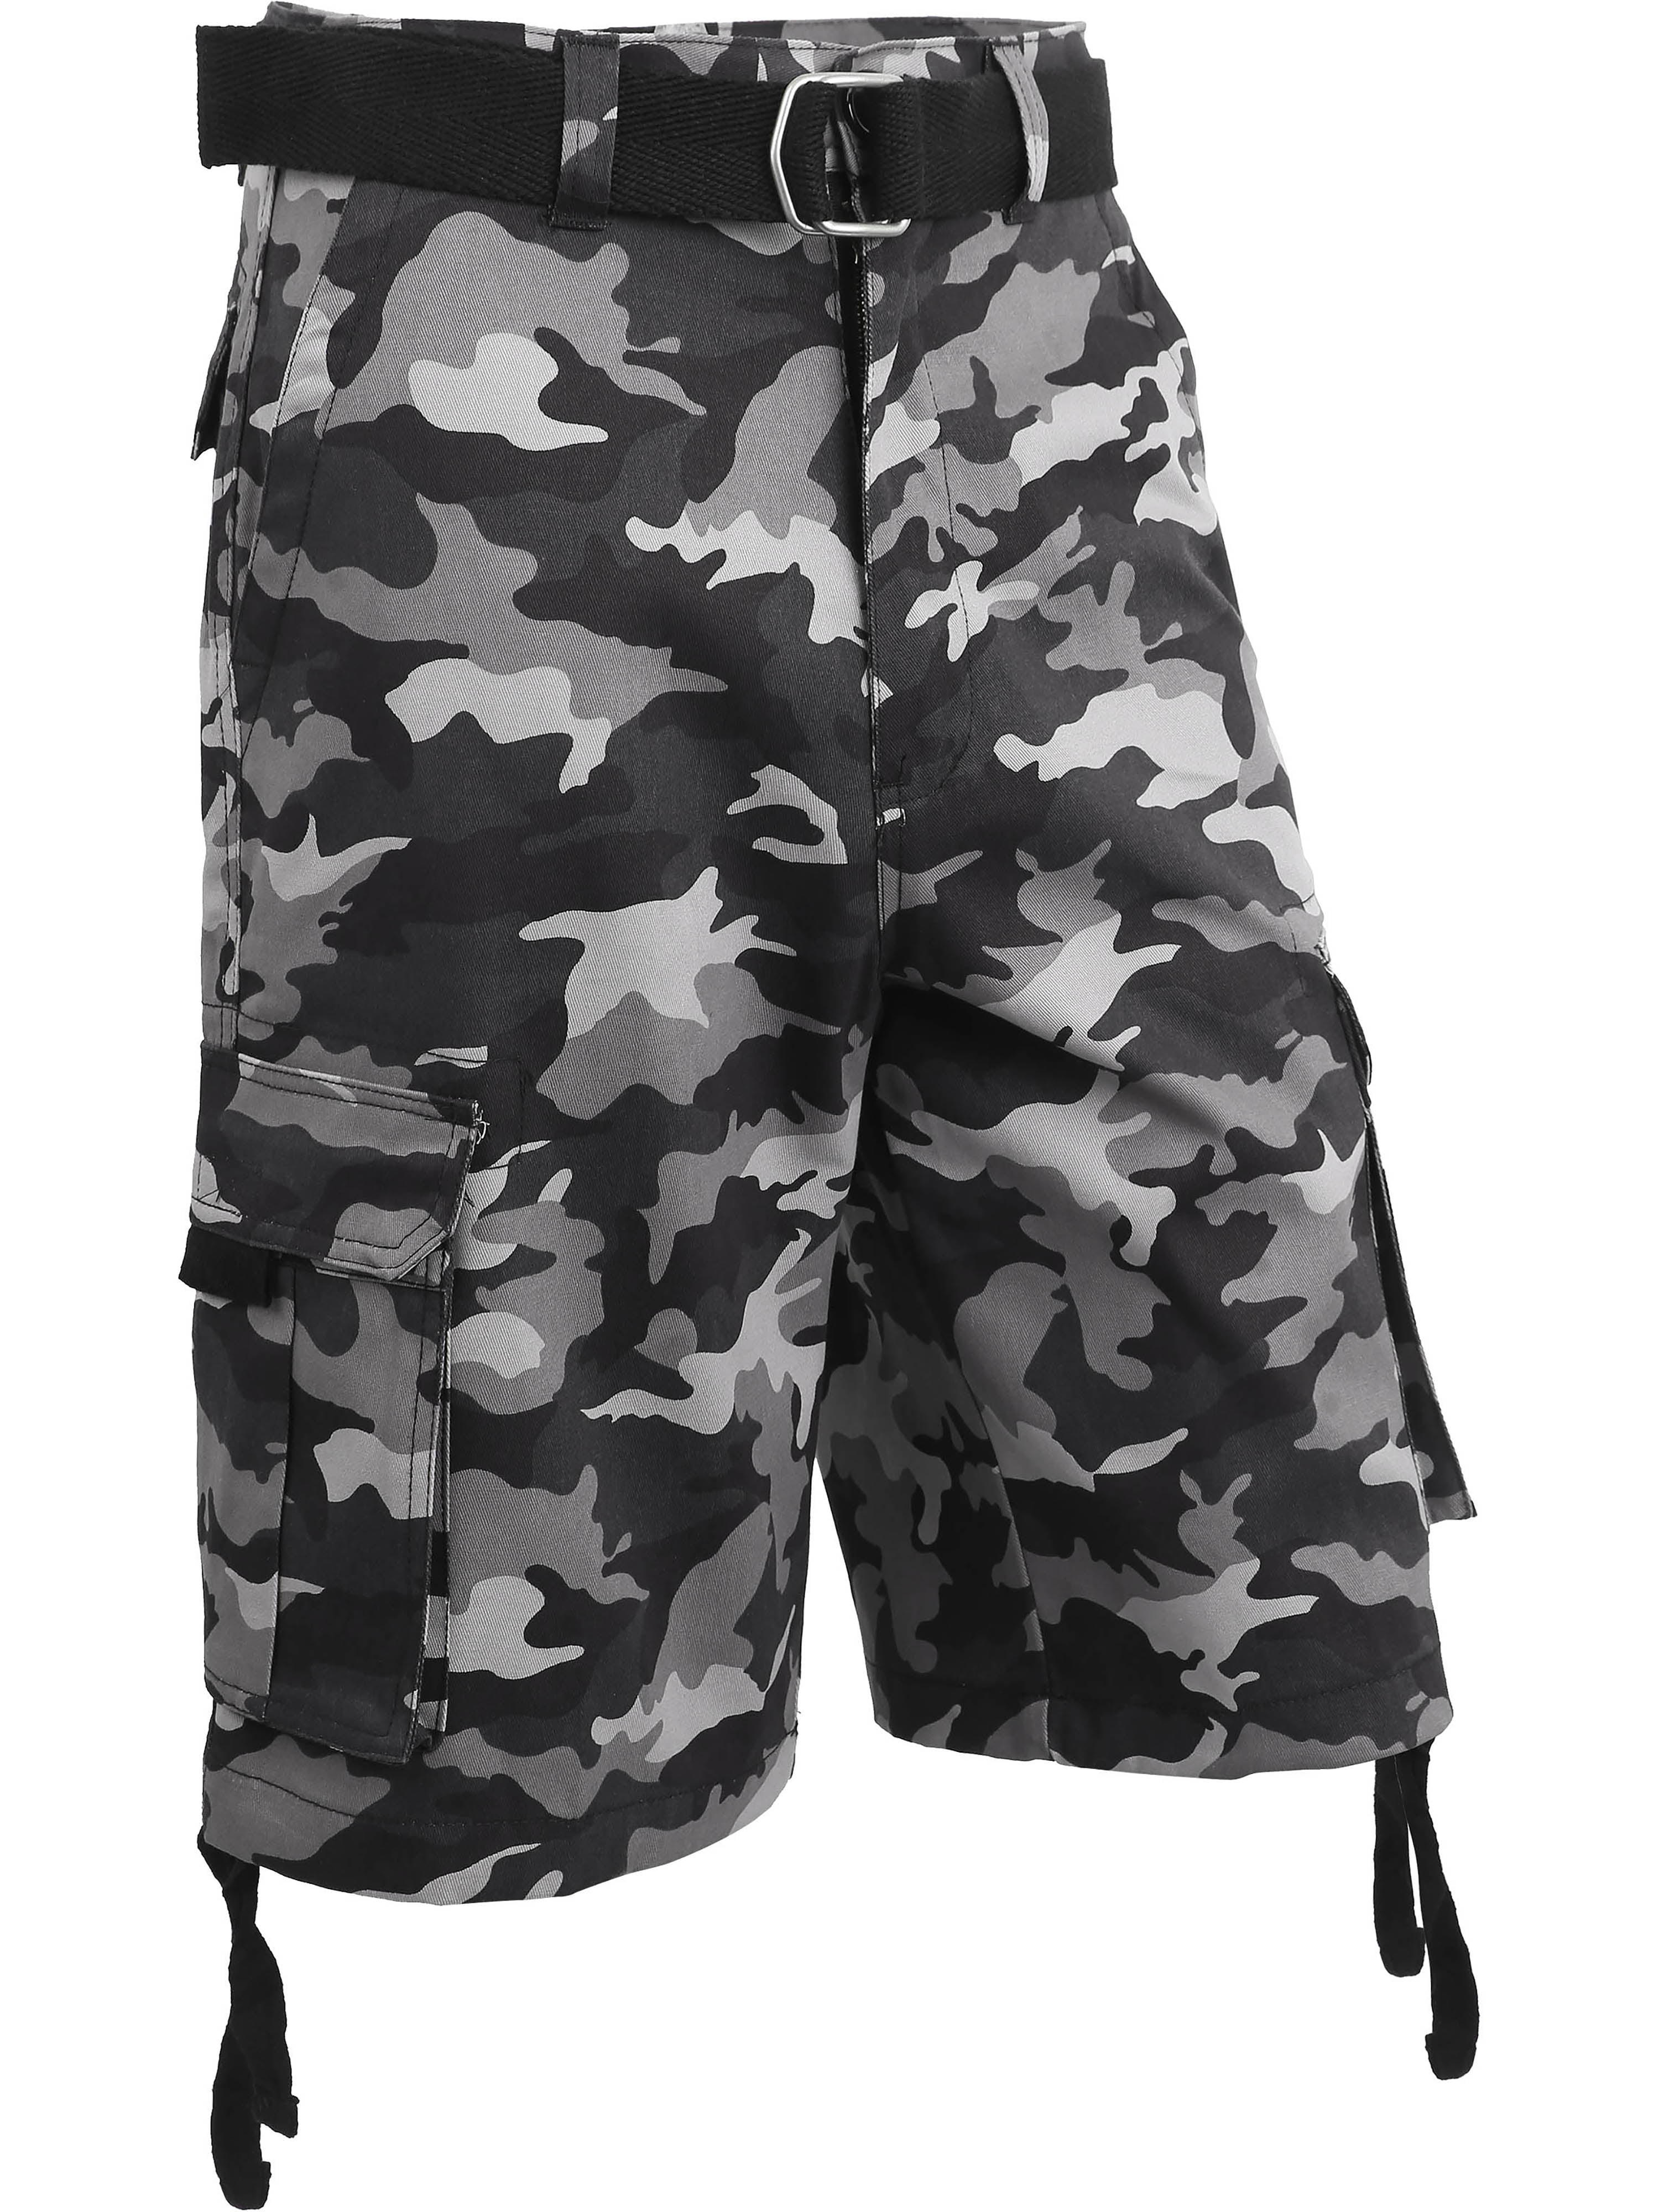 Outdoor Camouflage Twill Cargo Shorts 11 Inseam TRGPSG Mens Camo Multi-Pocket Relaxed Fit Casual Shorts 